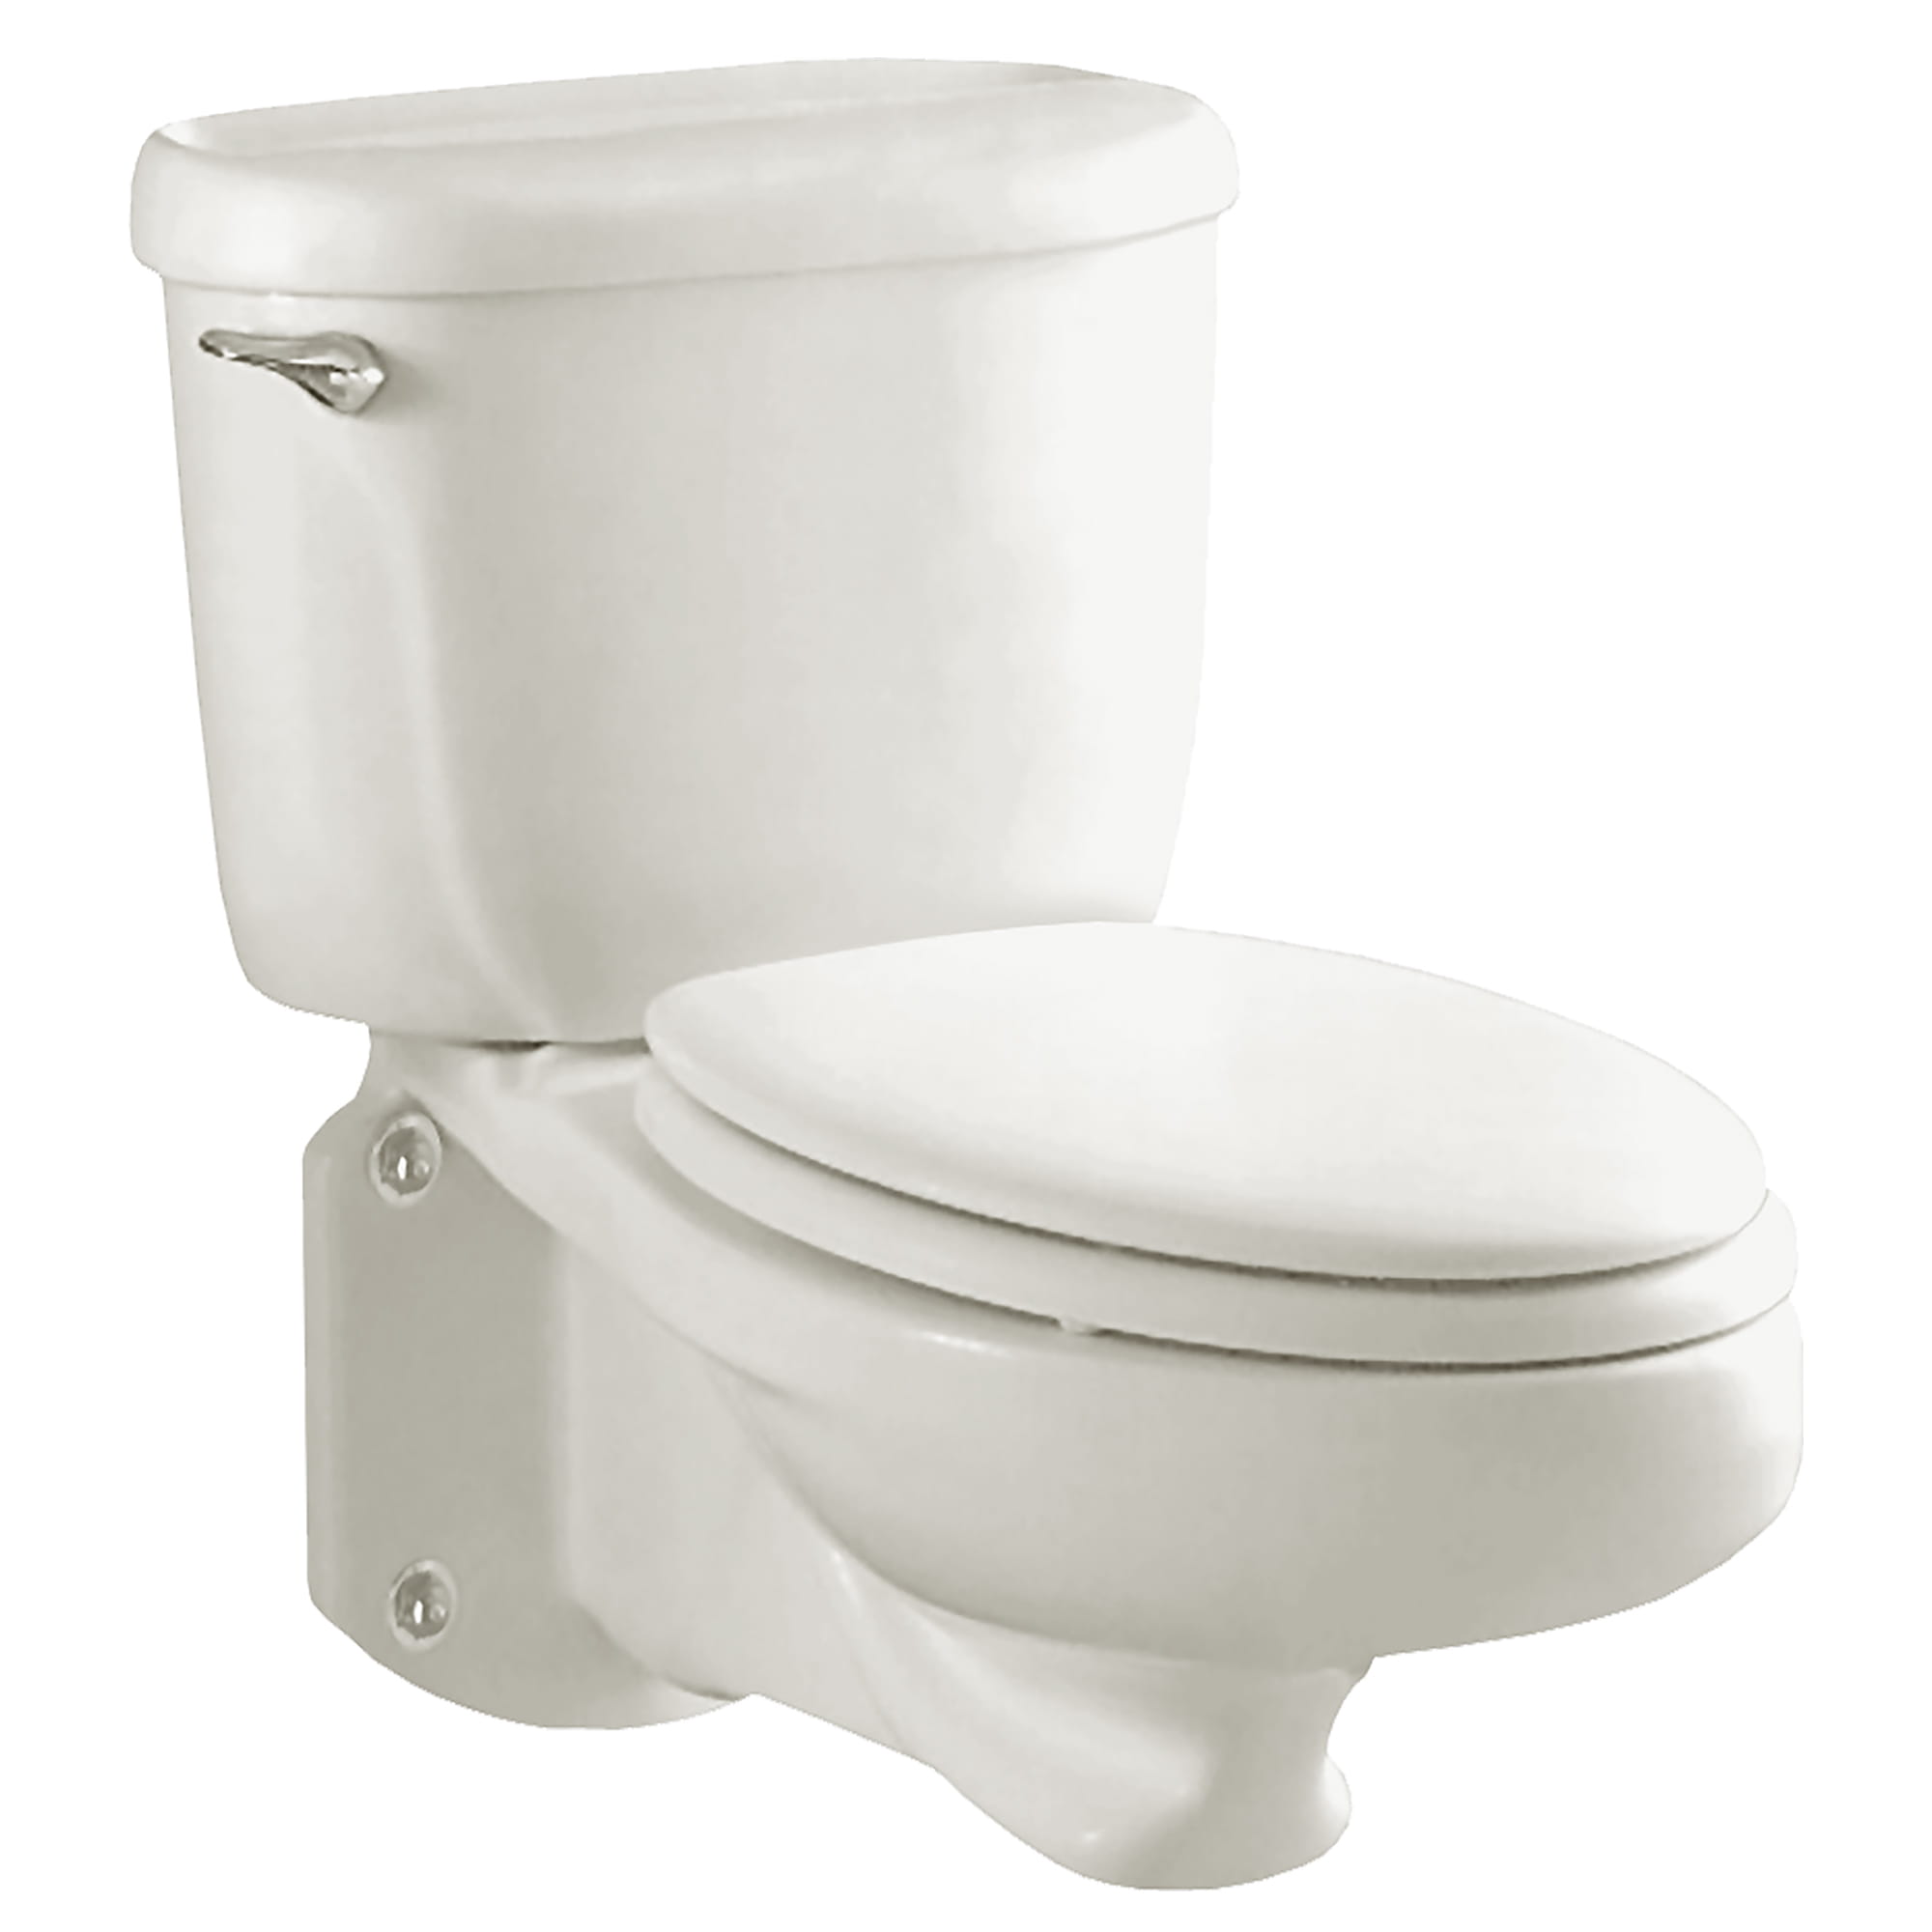 Glenwall 1.6 gpf Pressure Assisted Wall-Mounted Toilet